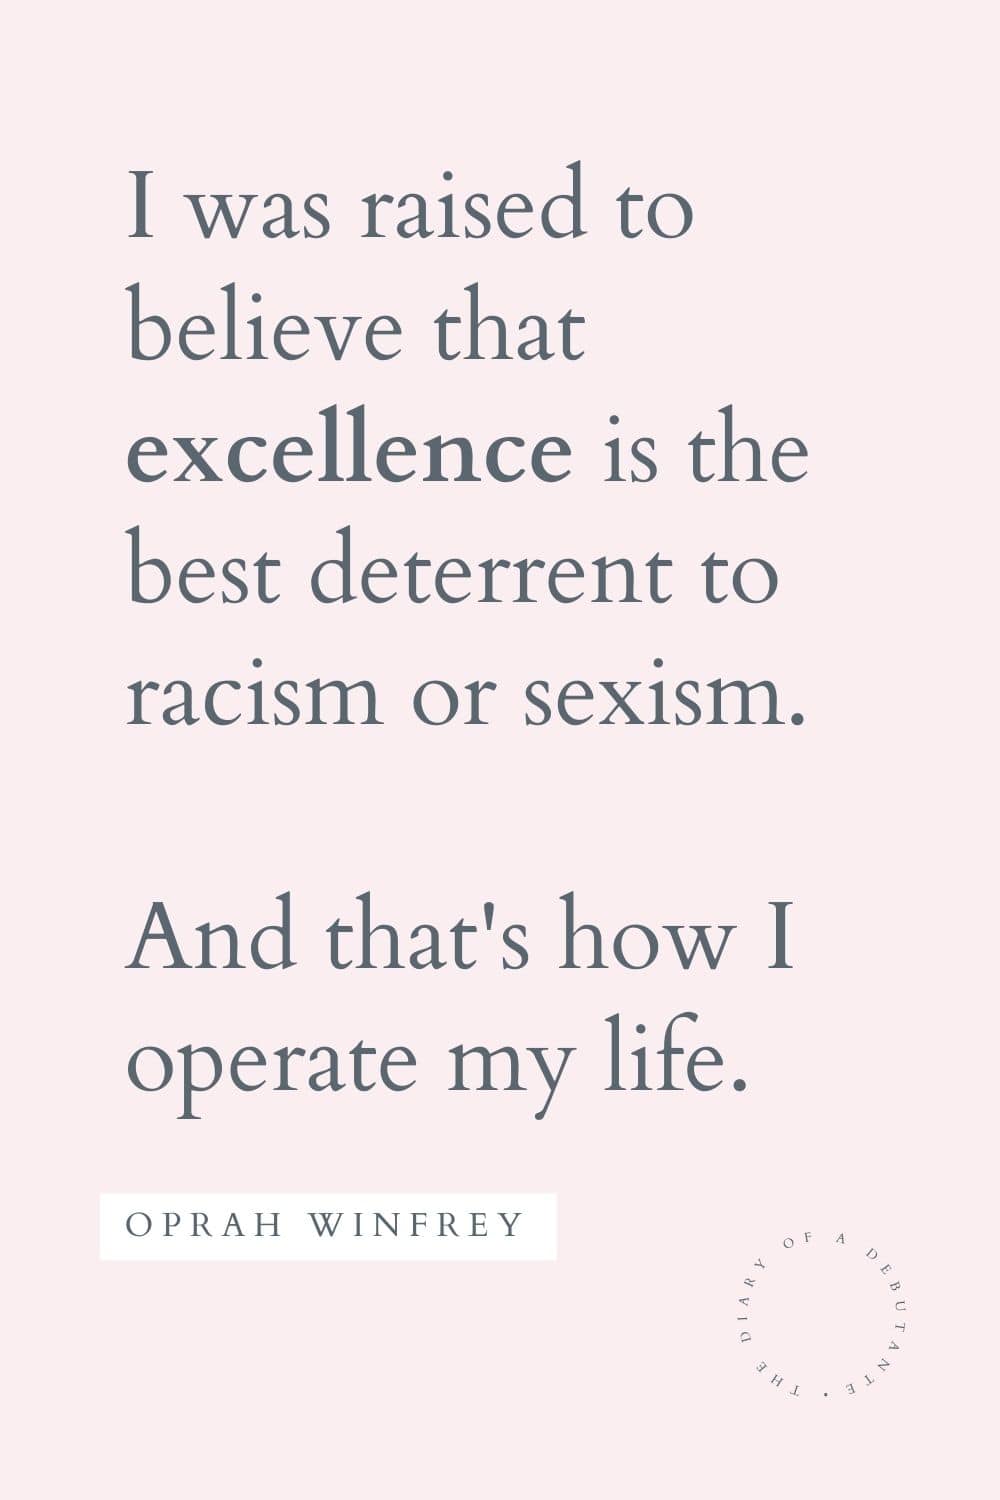 Oprah Winfrey quote curated as part of a collection of inspirational words for women by blogger Stephanie Ziajka on Diary of a Debutante